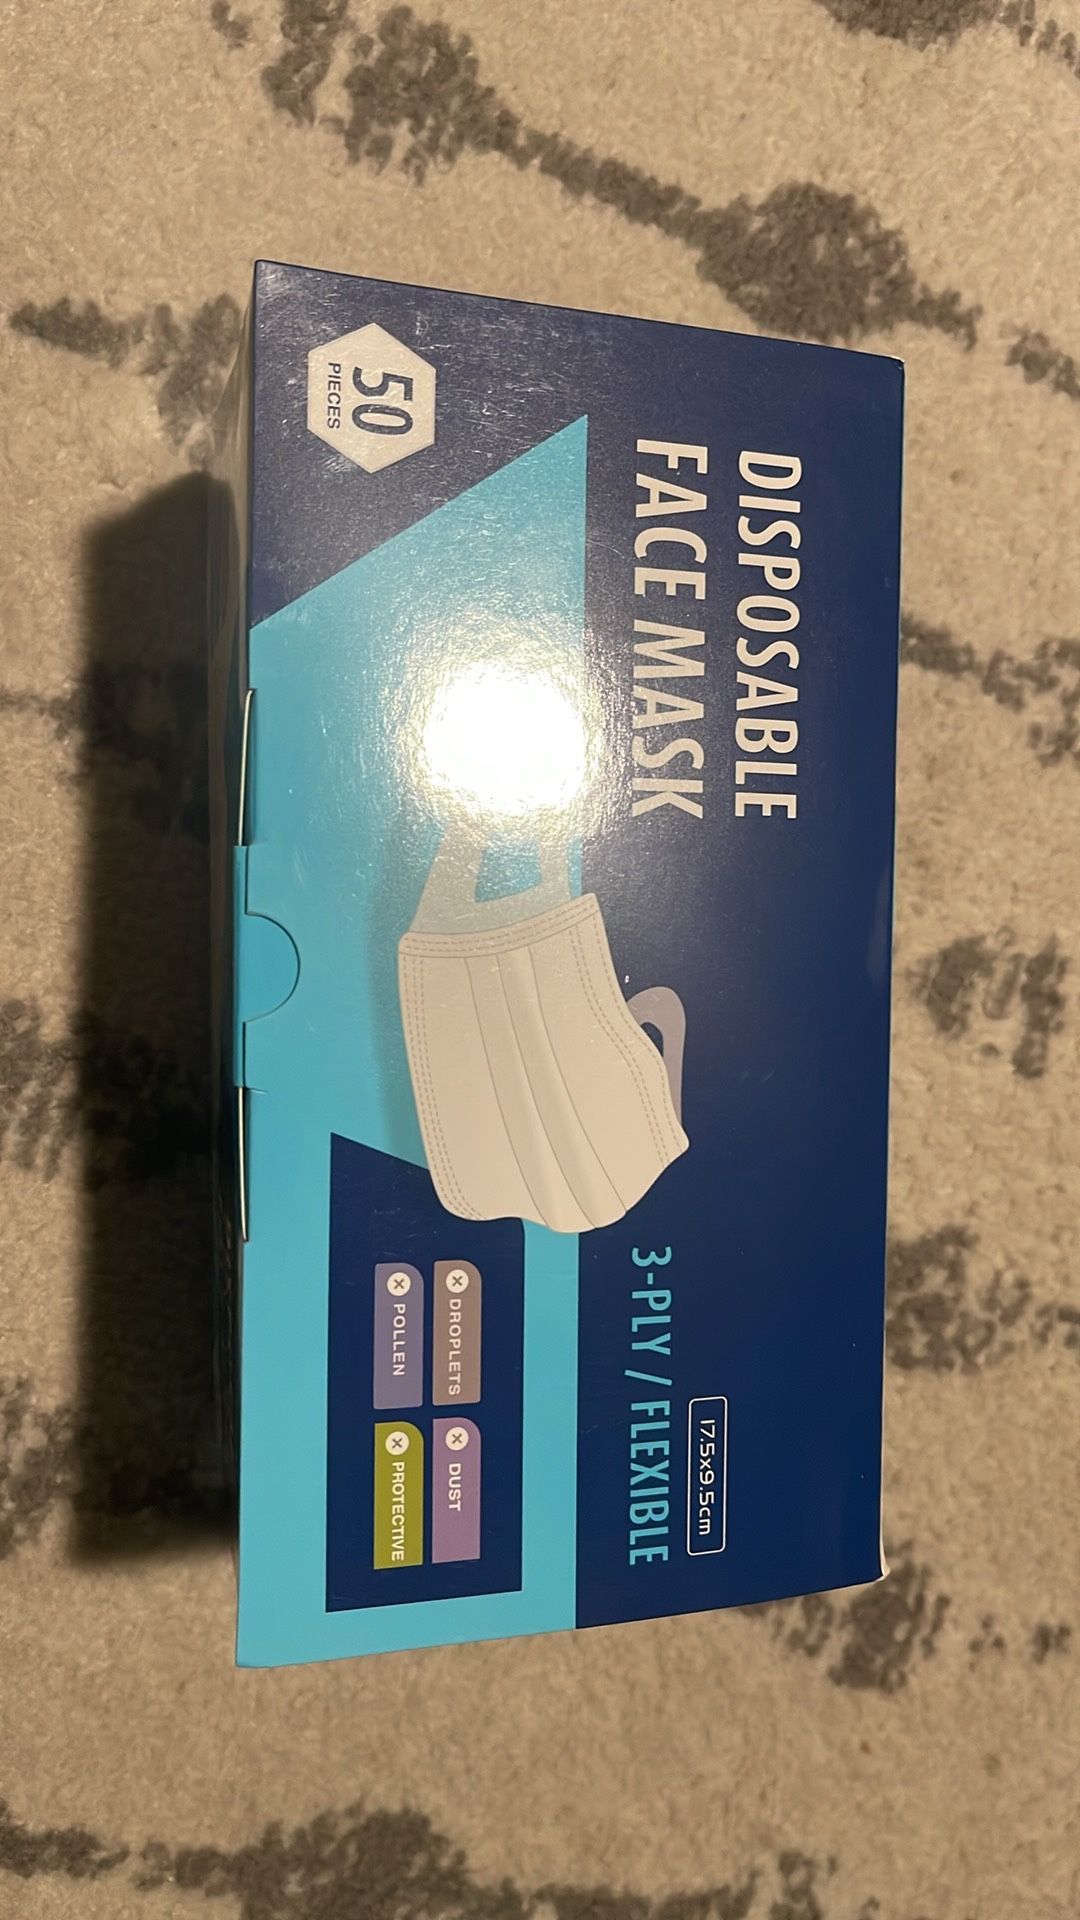 Disposable Face Mask Face Cover 3-Ply/FLEXIBLE  Each box has 50 mask 2 for 1$ 60 boxes available  Pickup in  upland, California